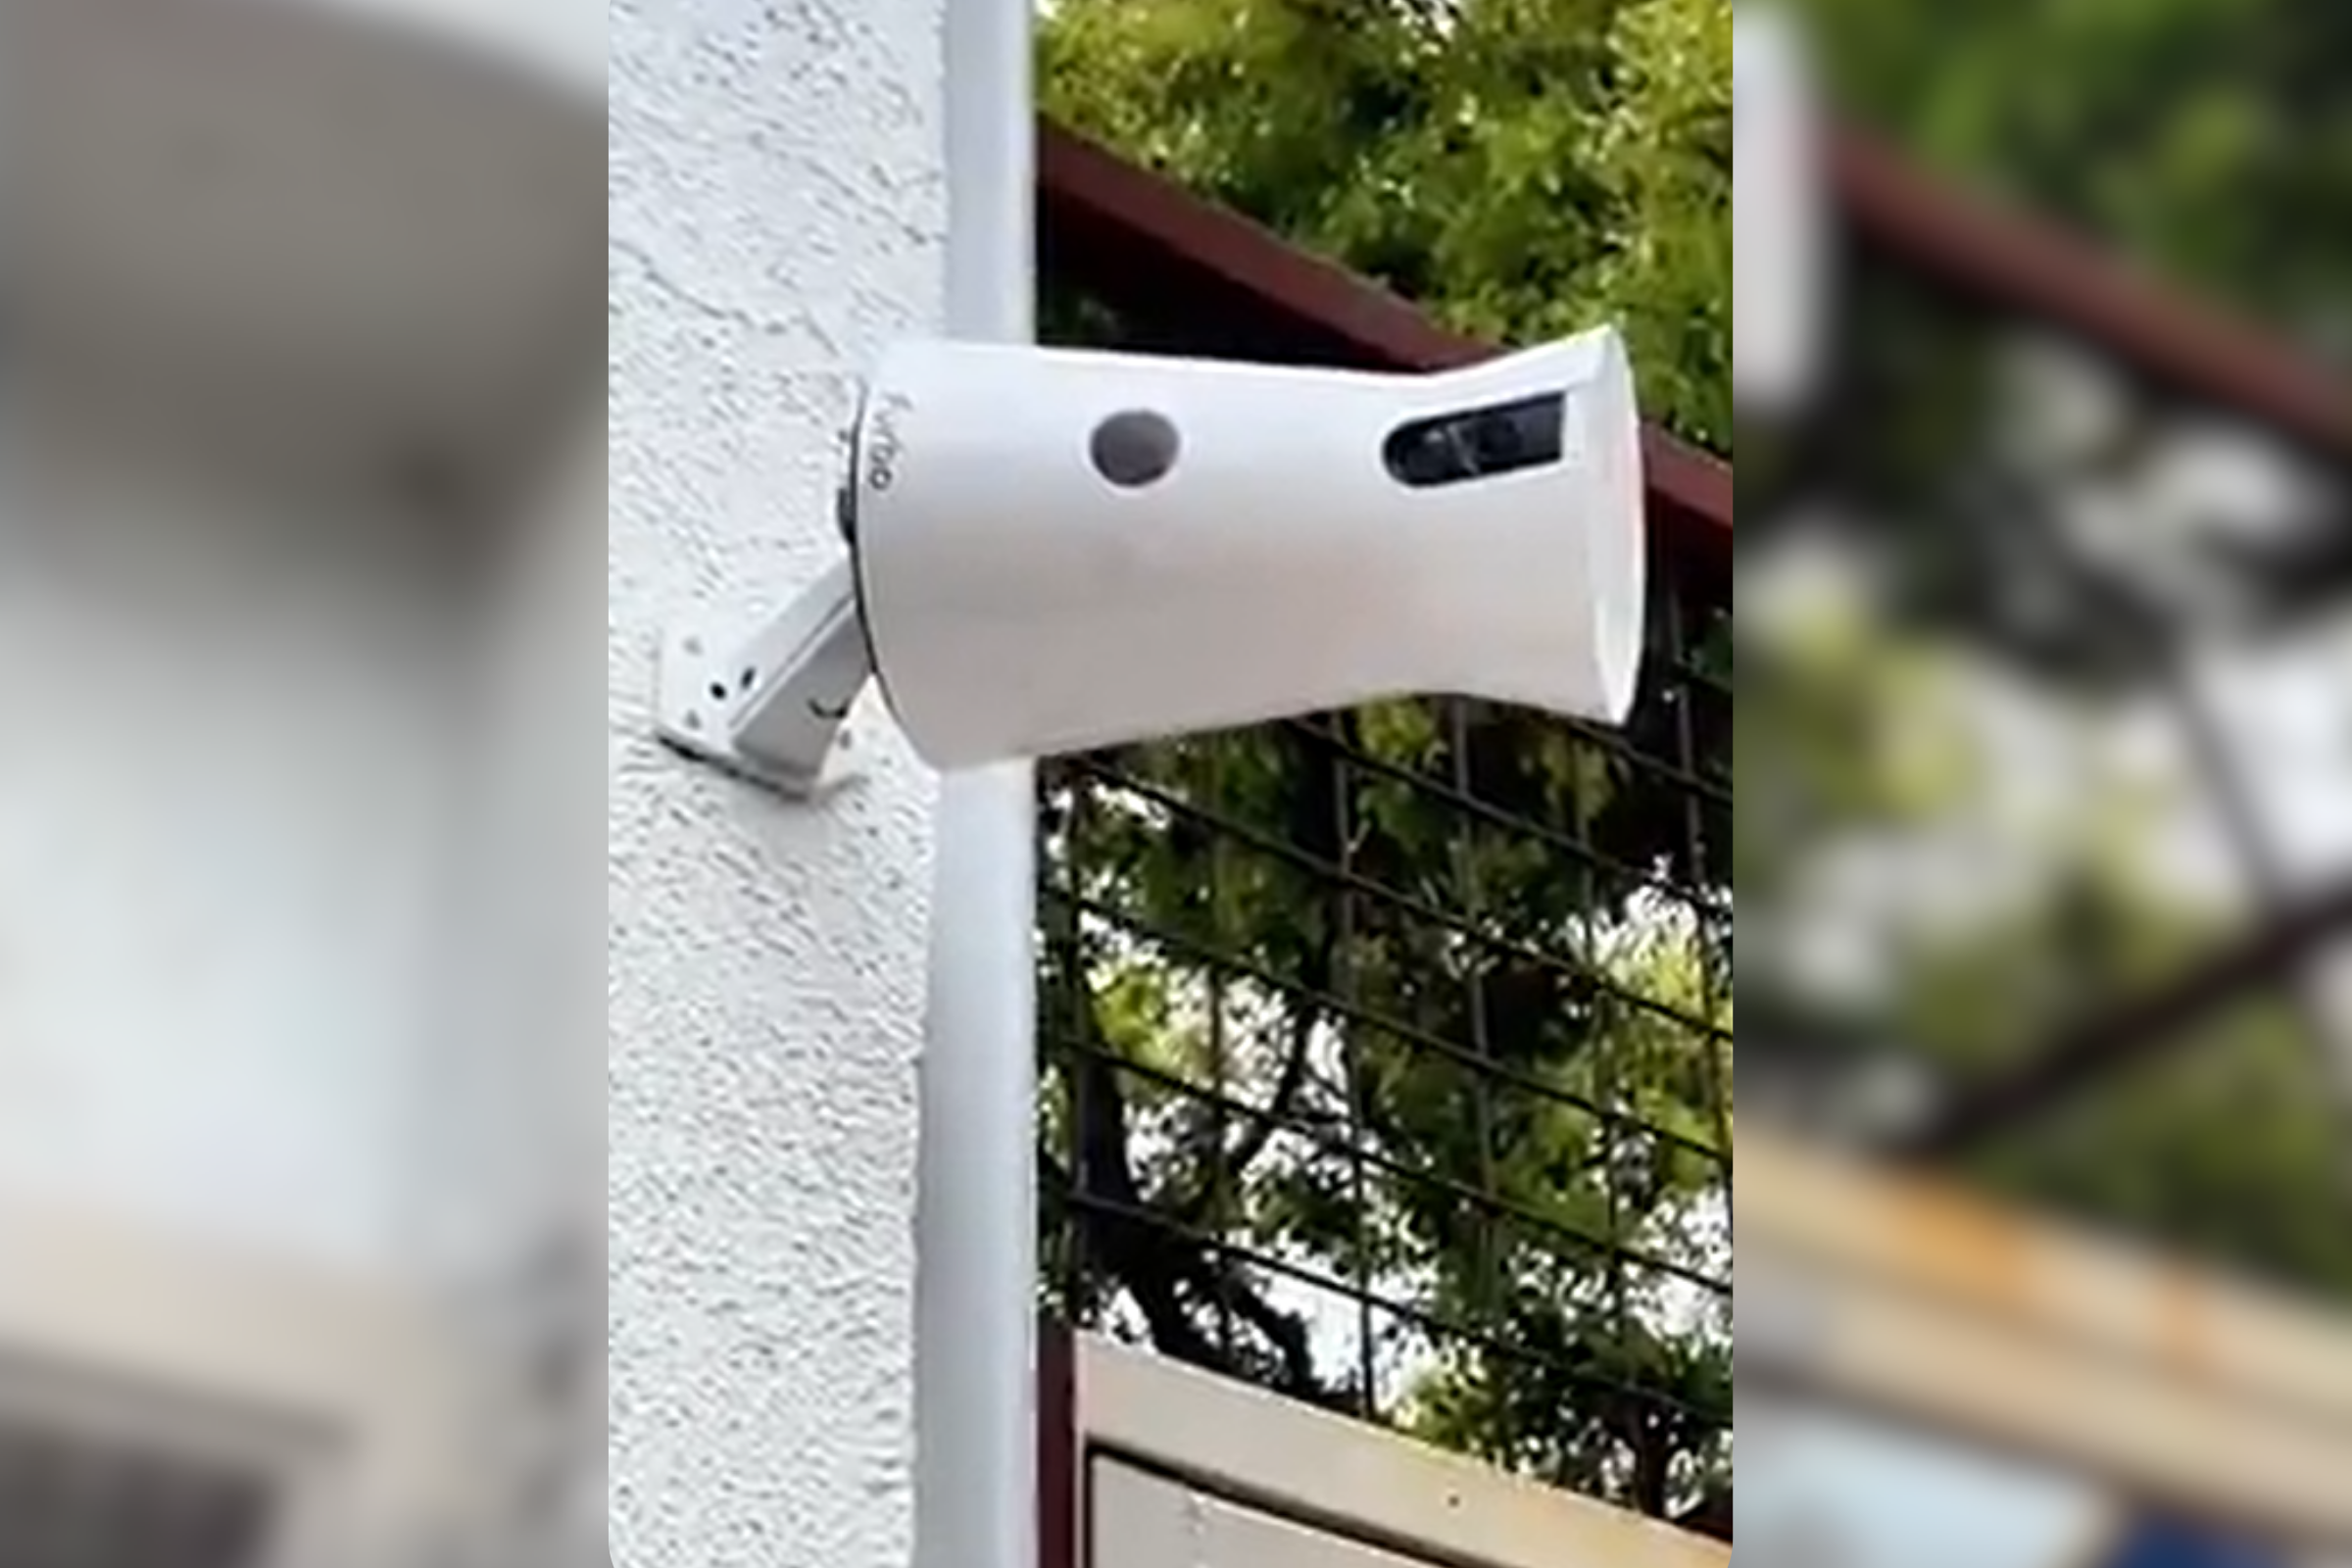 Tenant notices landlord installs cameras, in disbelief after looking closer